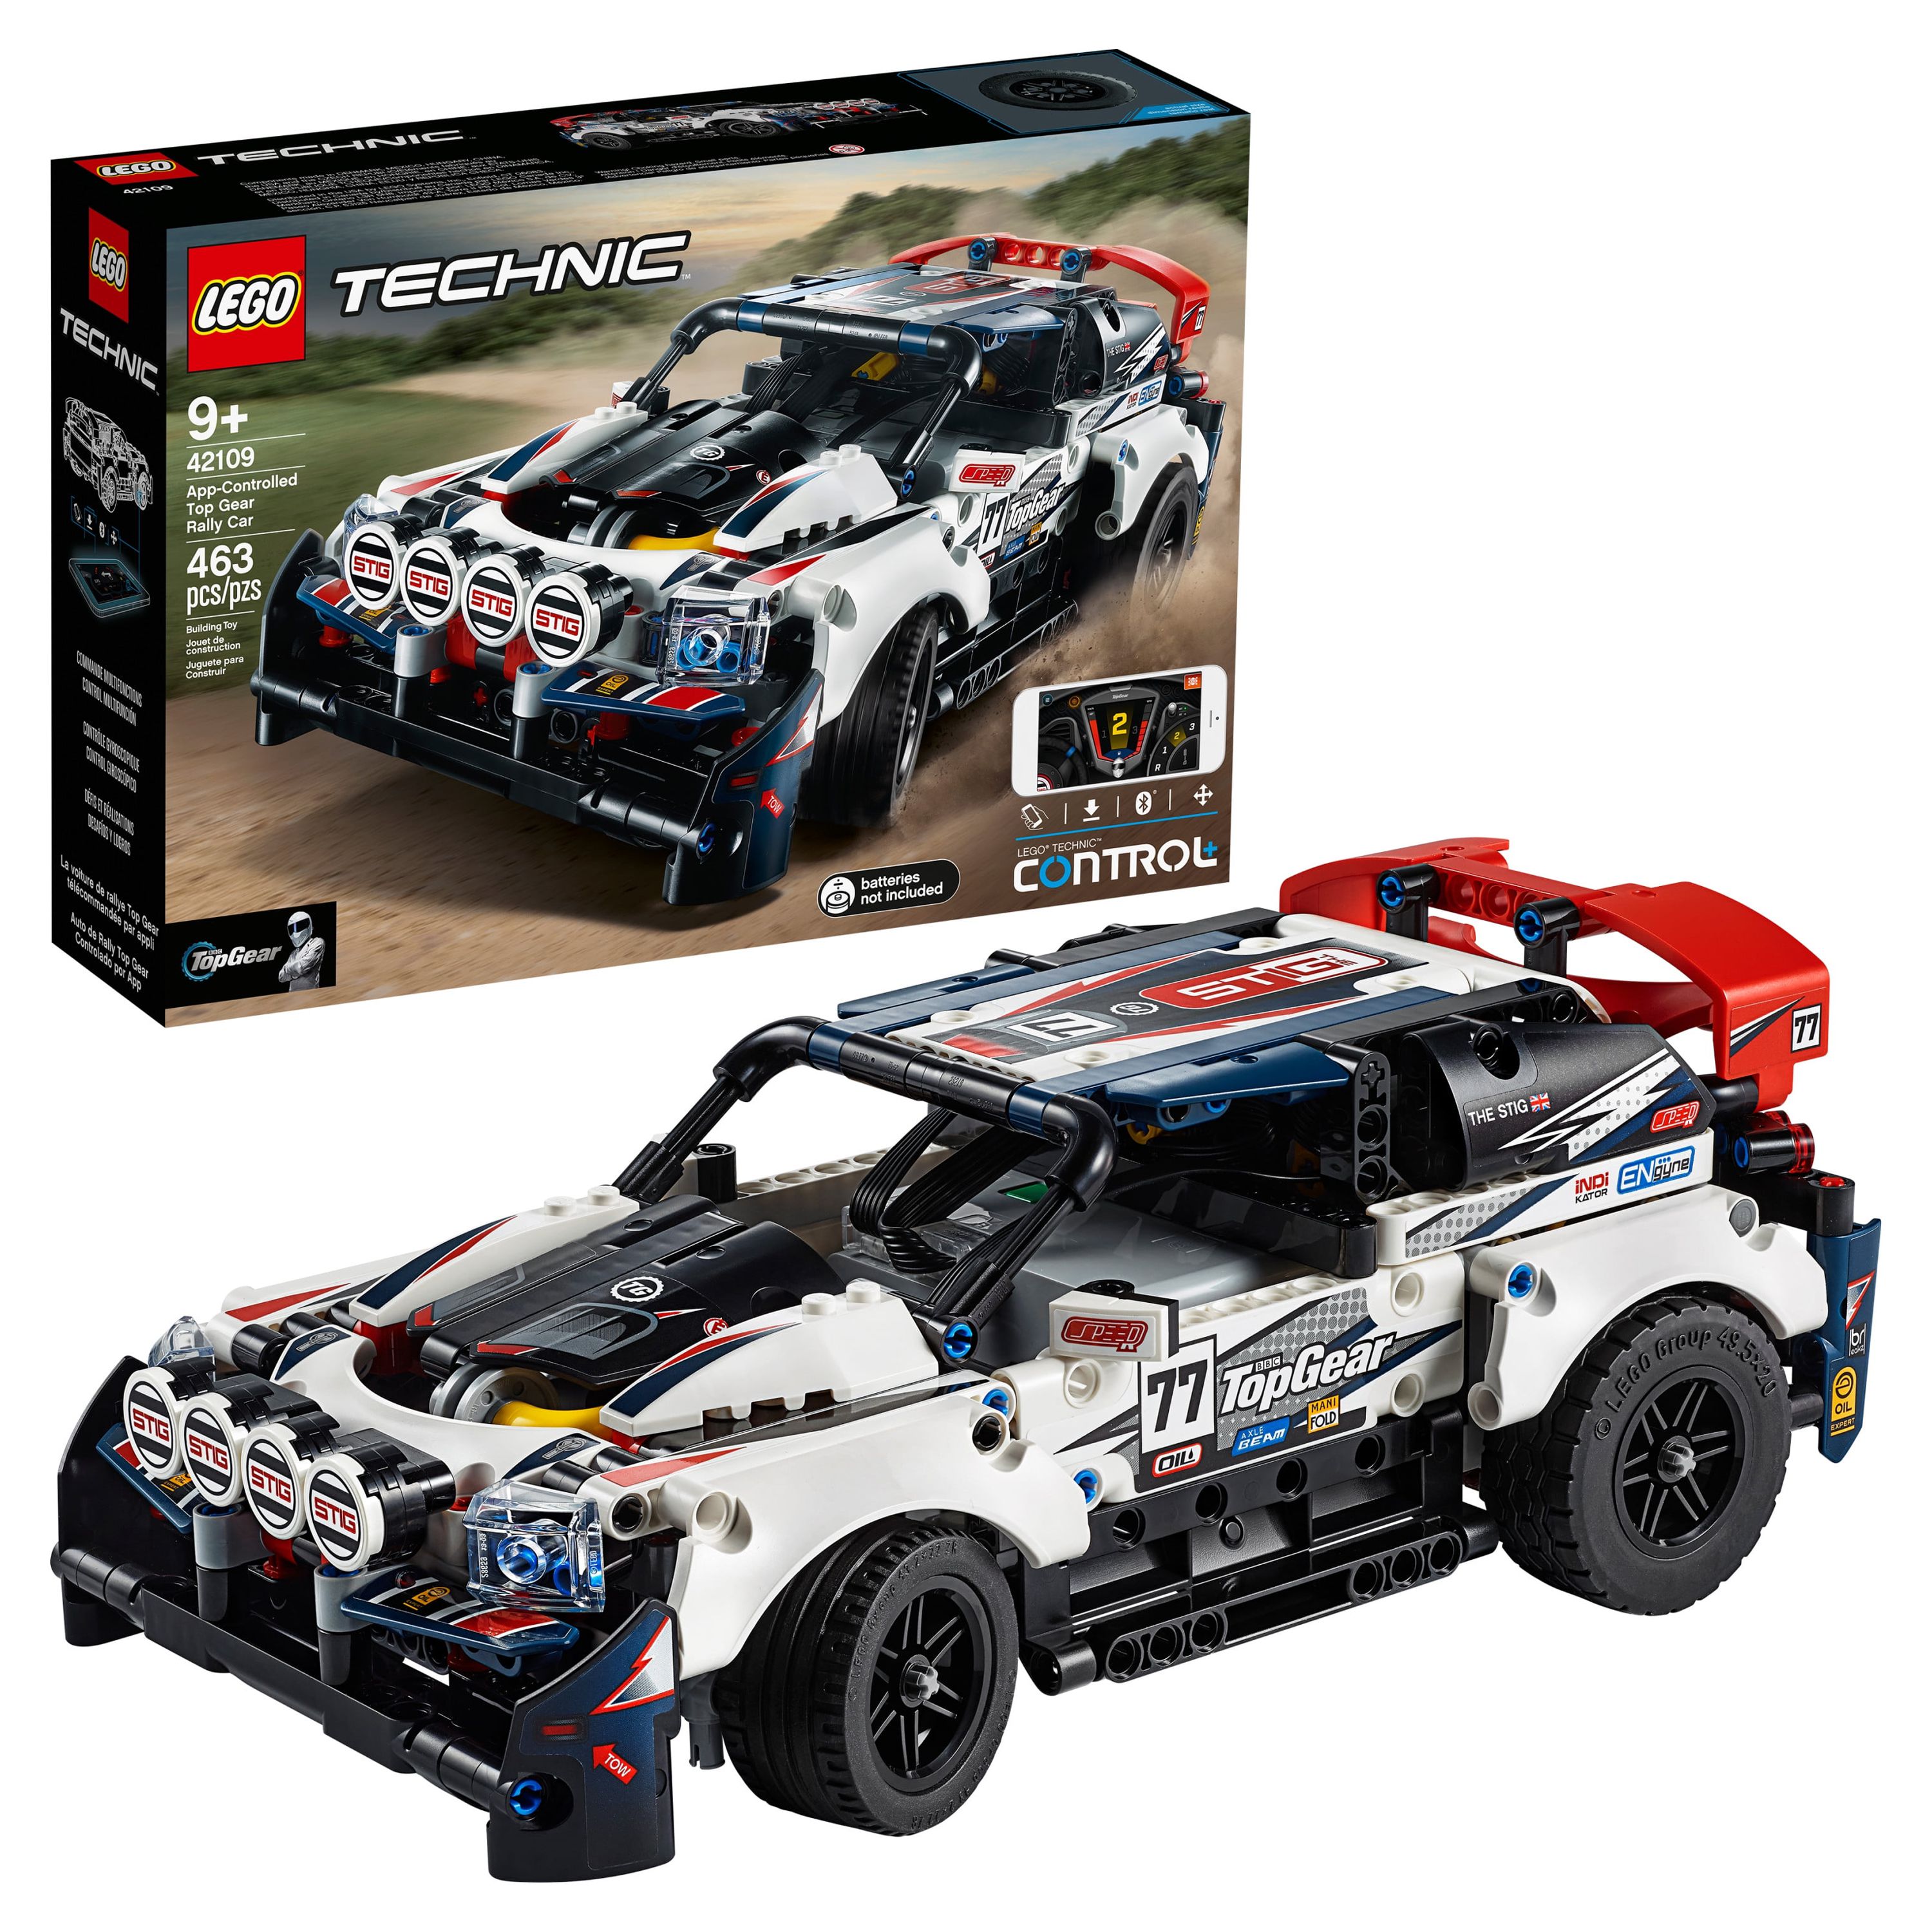 LEGO Technic App-Controlled Top Gear Rally Car 42109 - image 1 of 5